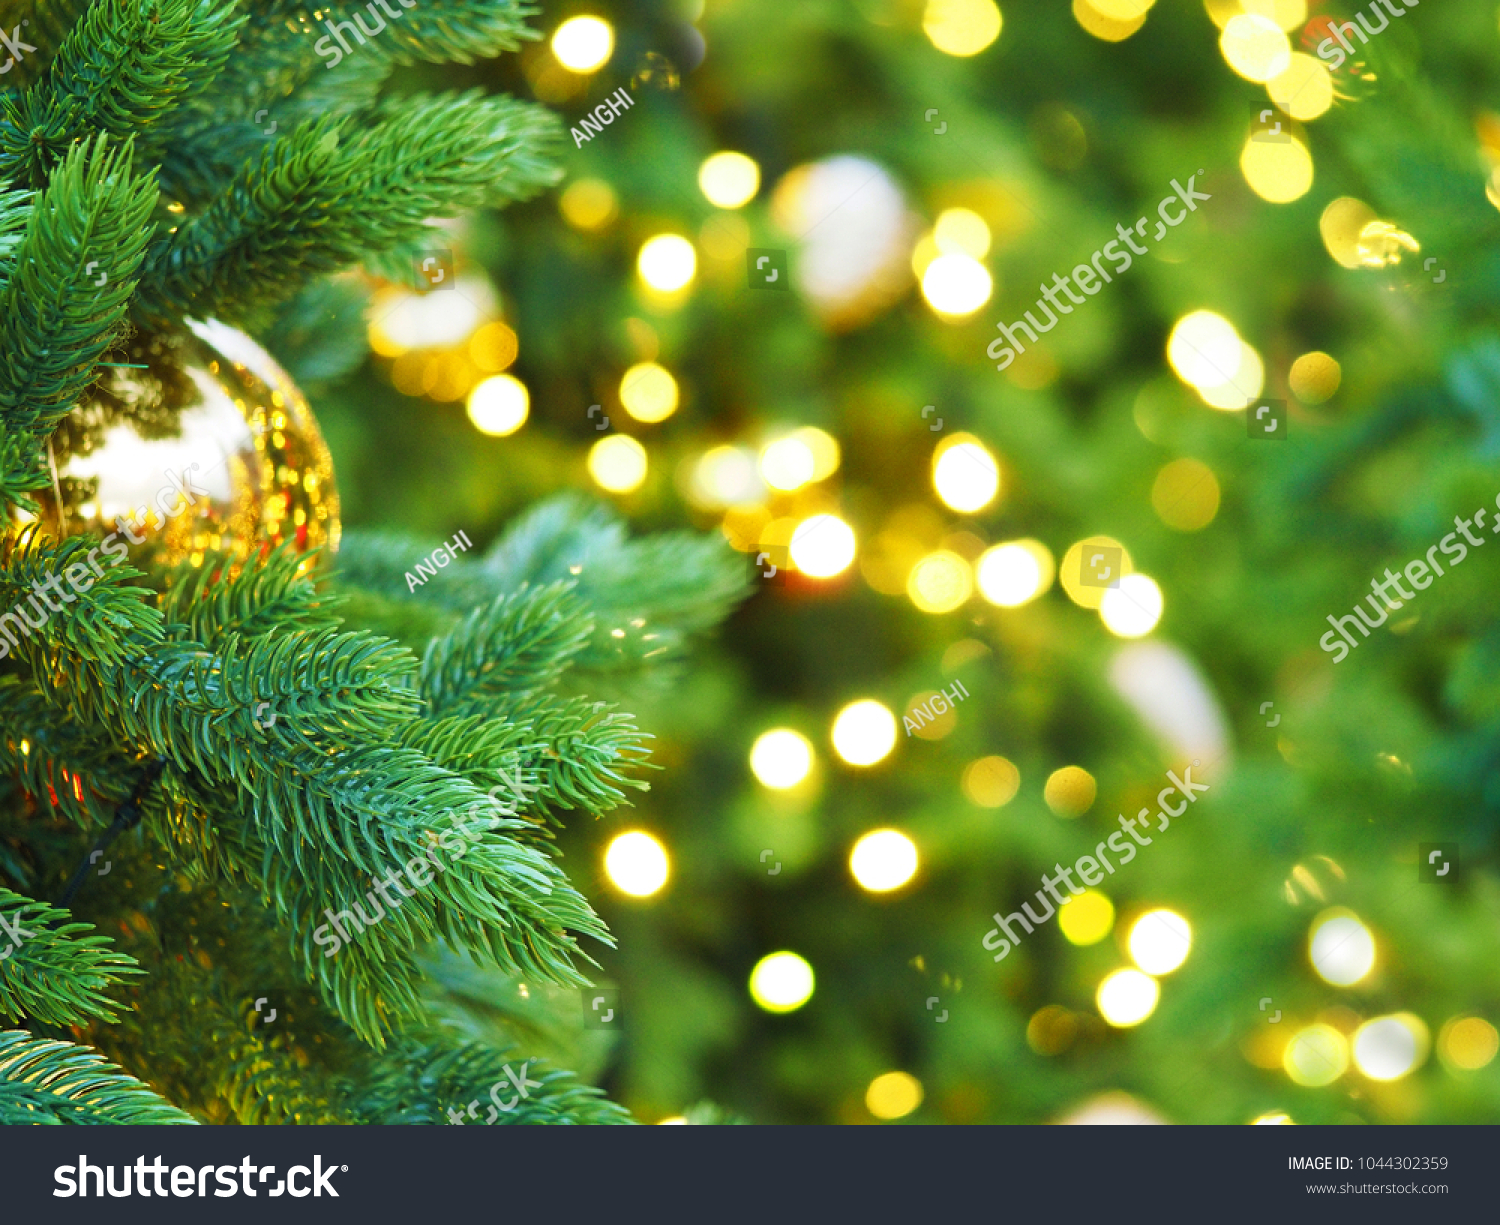 Christmas tree with holiday golden decorations and lights. Space for text. Festive New Year background, selective focus, Christmas fir tree garlands, balls and toys. Illumination #1044302359